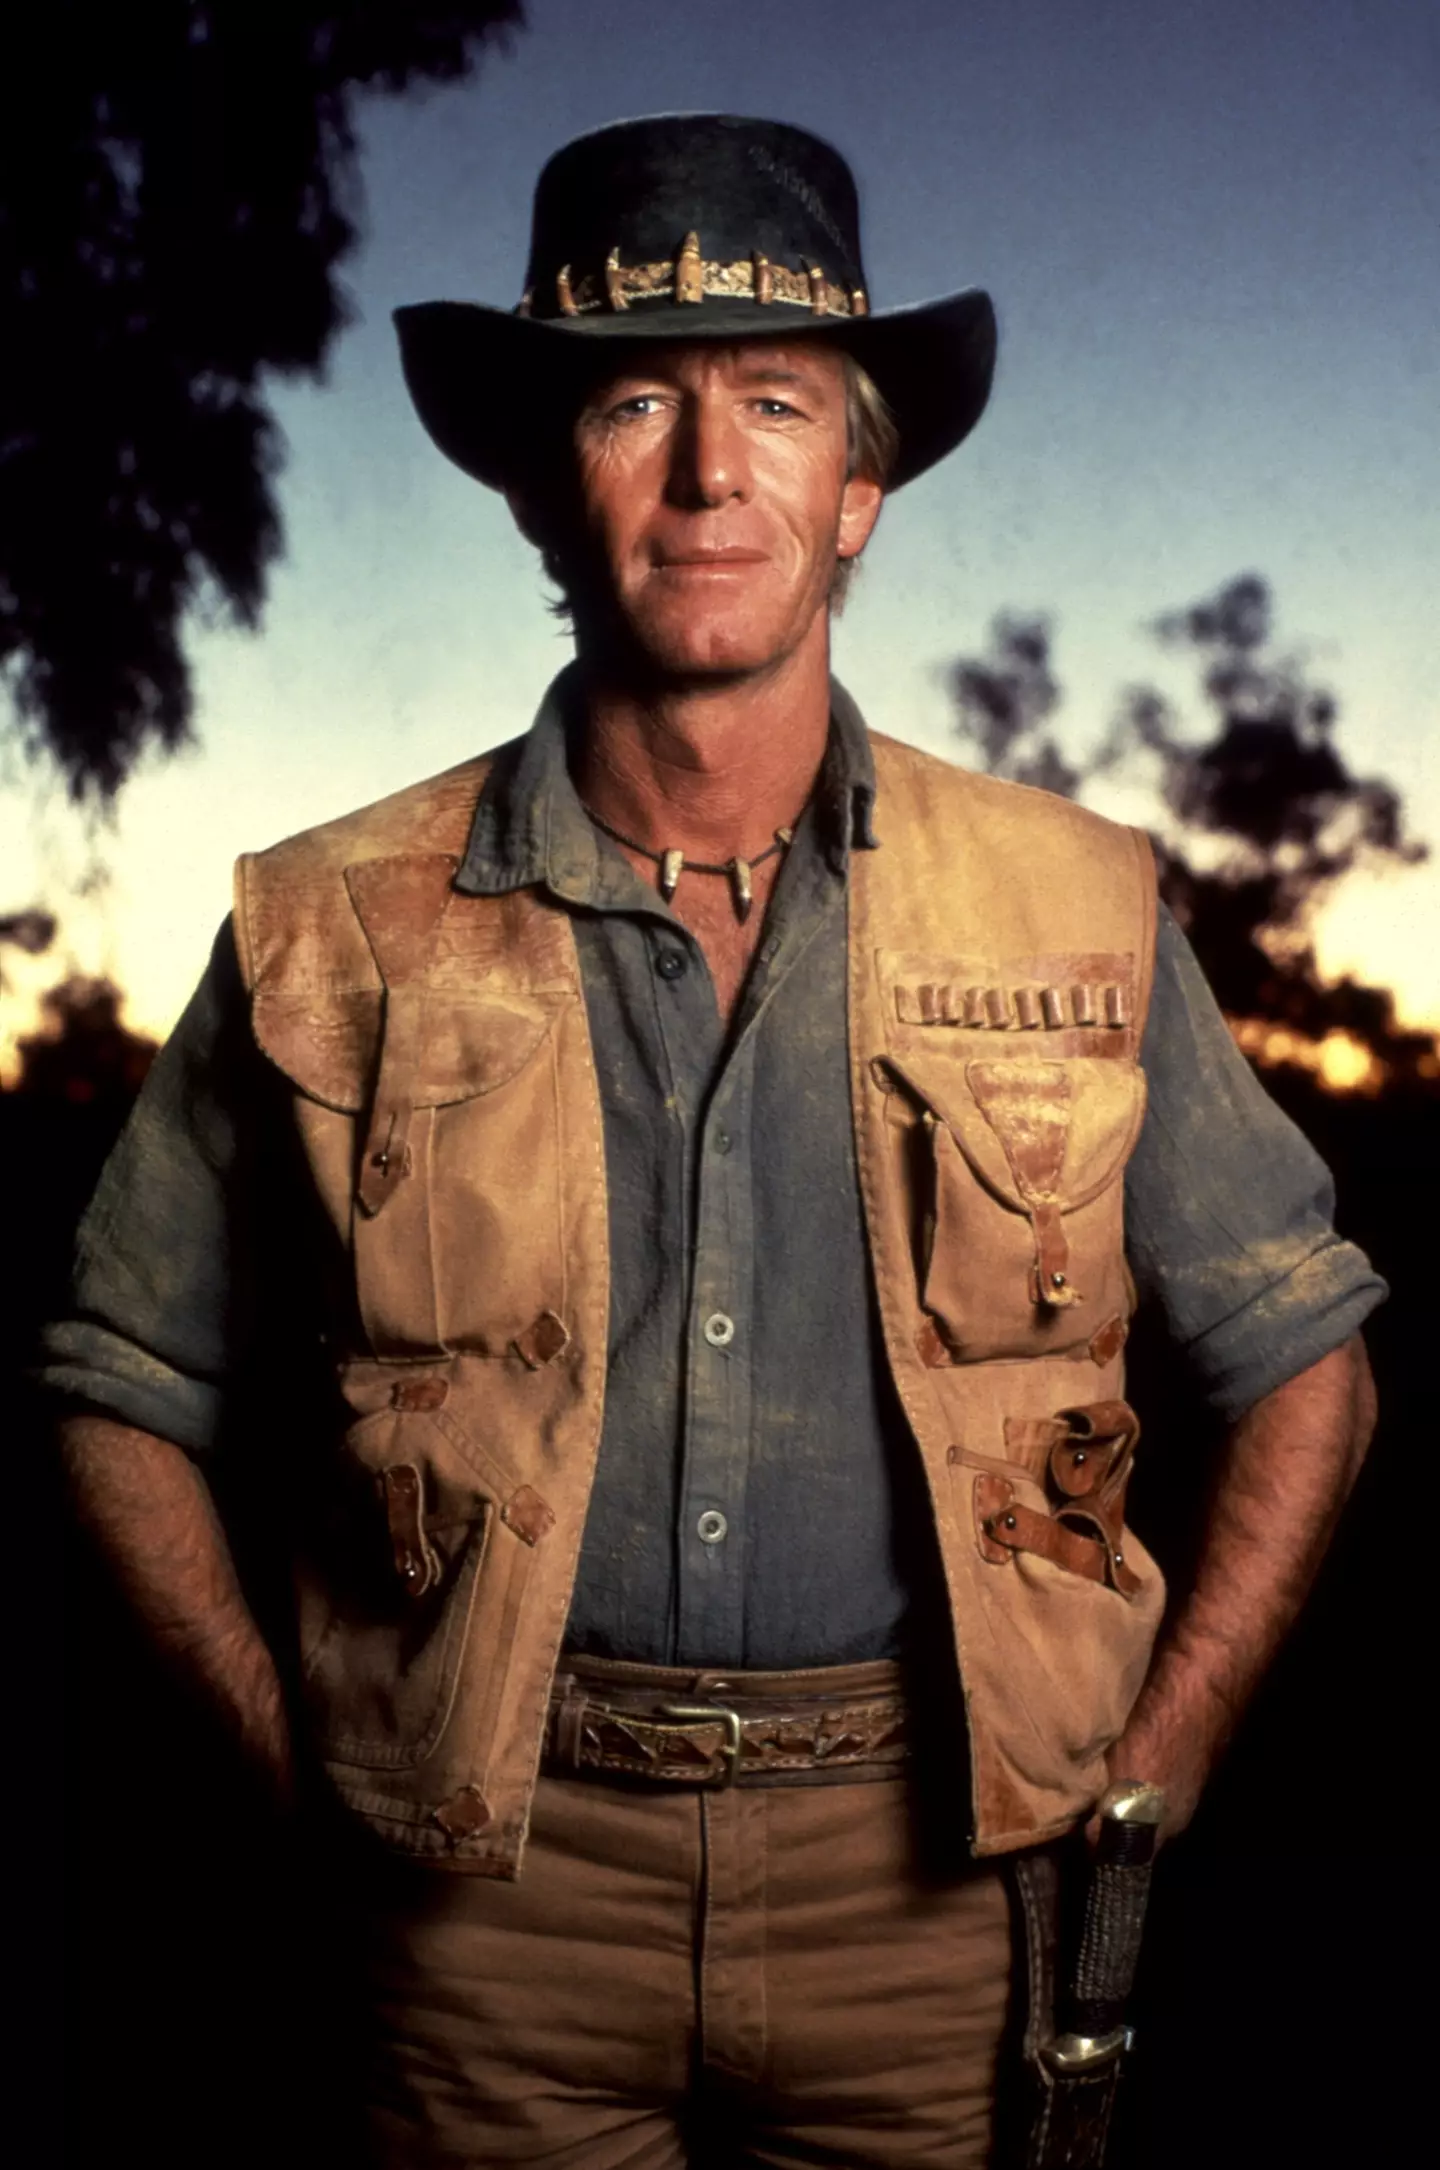 Hogan is best known for his role in Crocodile Dundee.